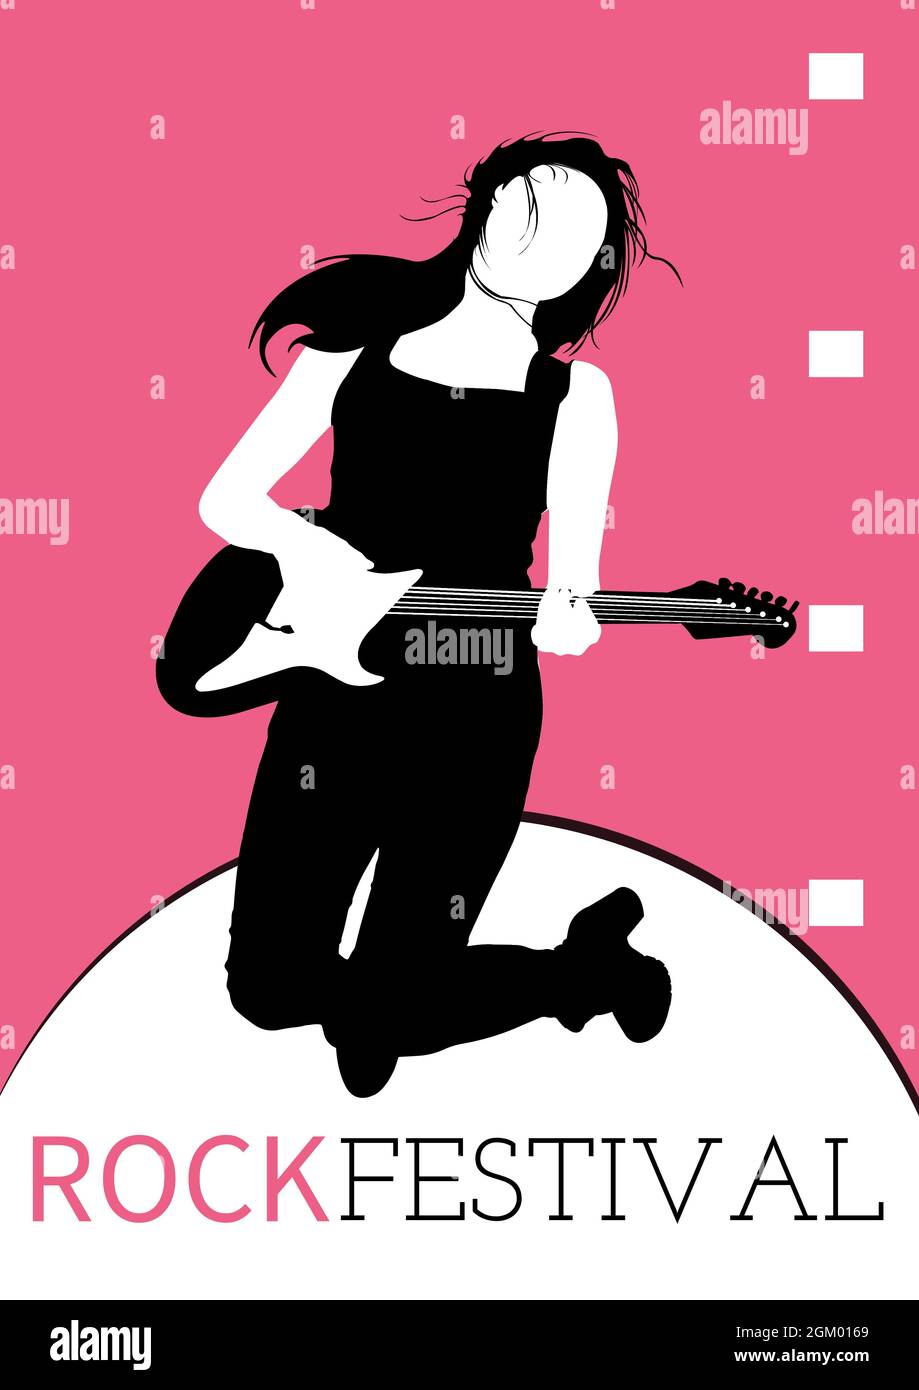 Rock festival text over female musician playing a electric guitar icon against pink background Stock Photo